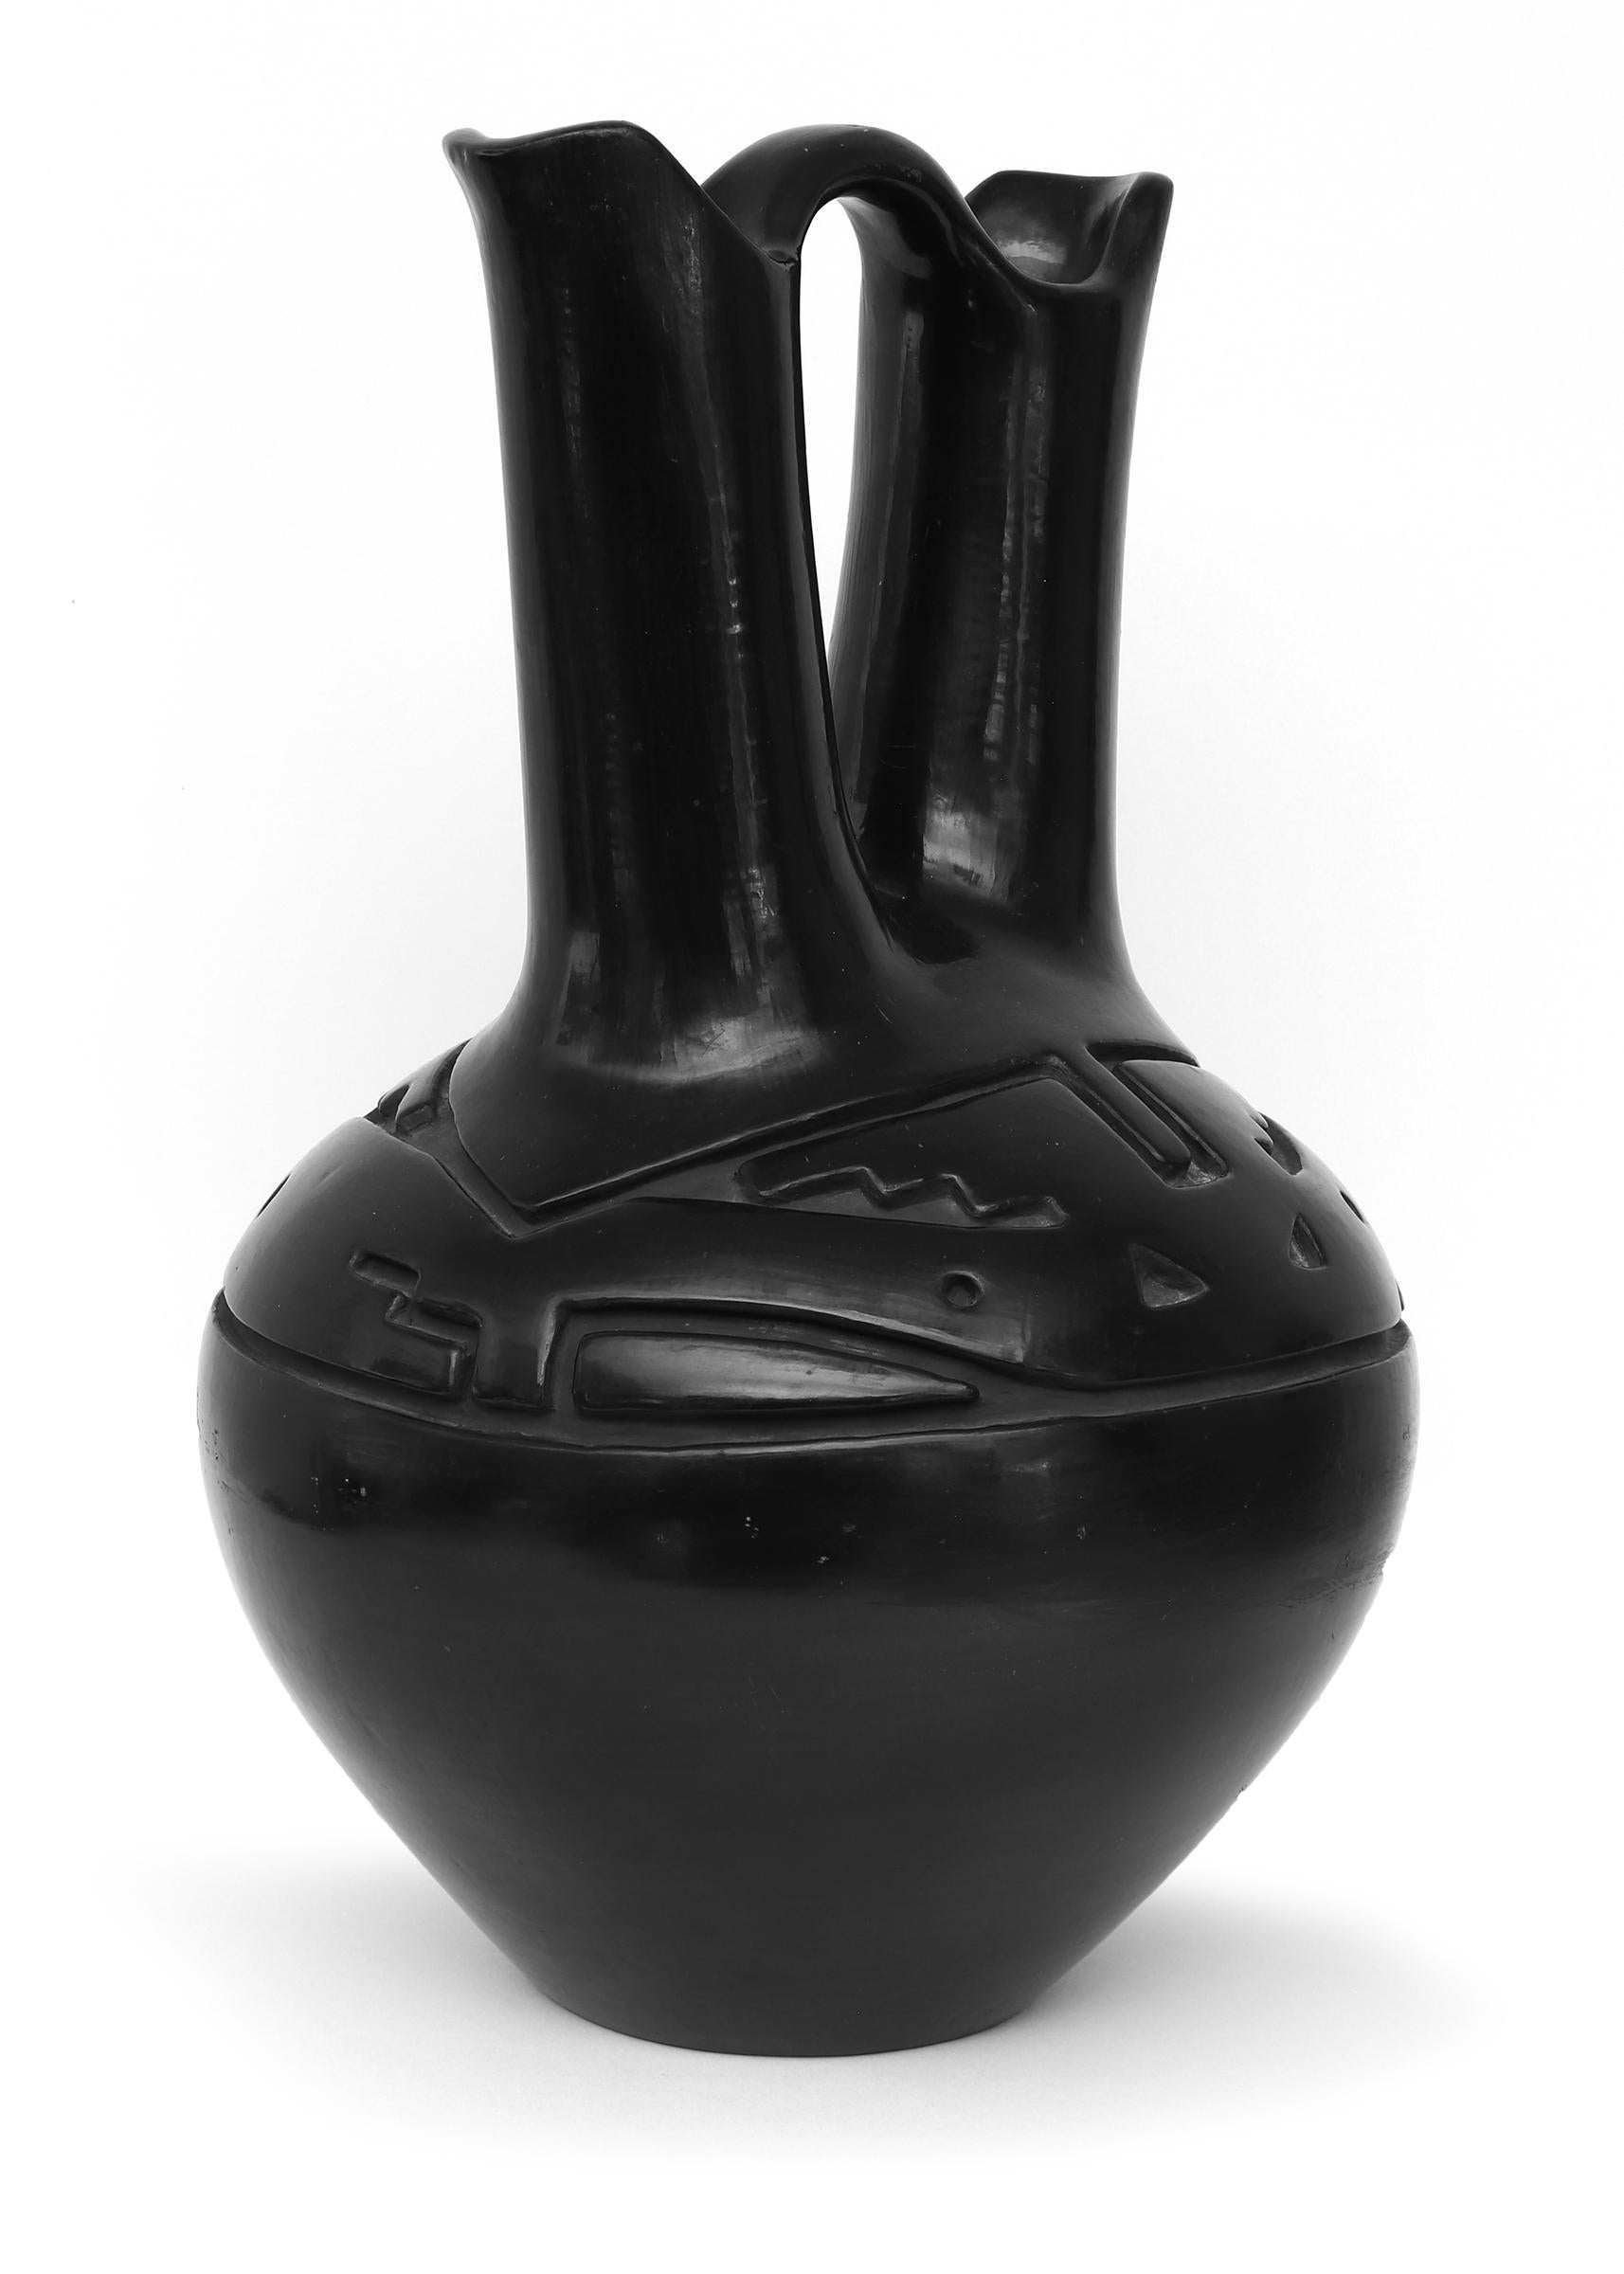 An exceptional large black ware Wedding Vase form by renowned 20th century Santa Clara Pueblo potter, Margaret Tafoya (1904-2001). Hand coiled with a double shoulder and carved finished with a highly polished black slip. 
Margaret Tafoya was born in